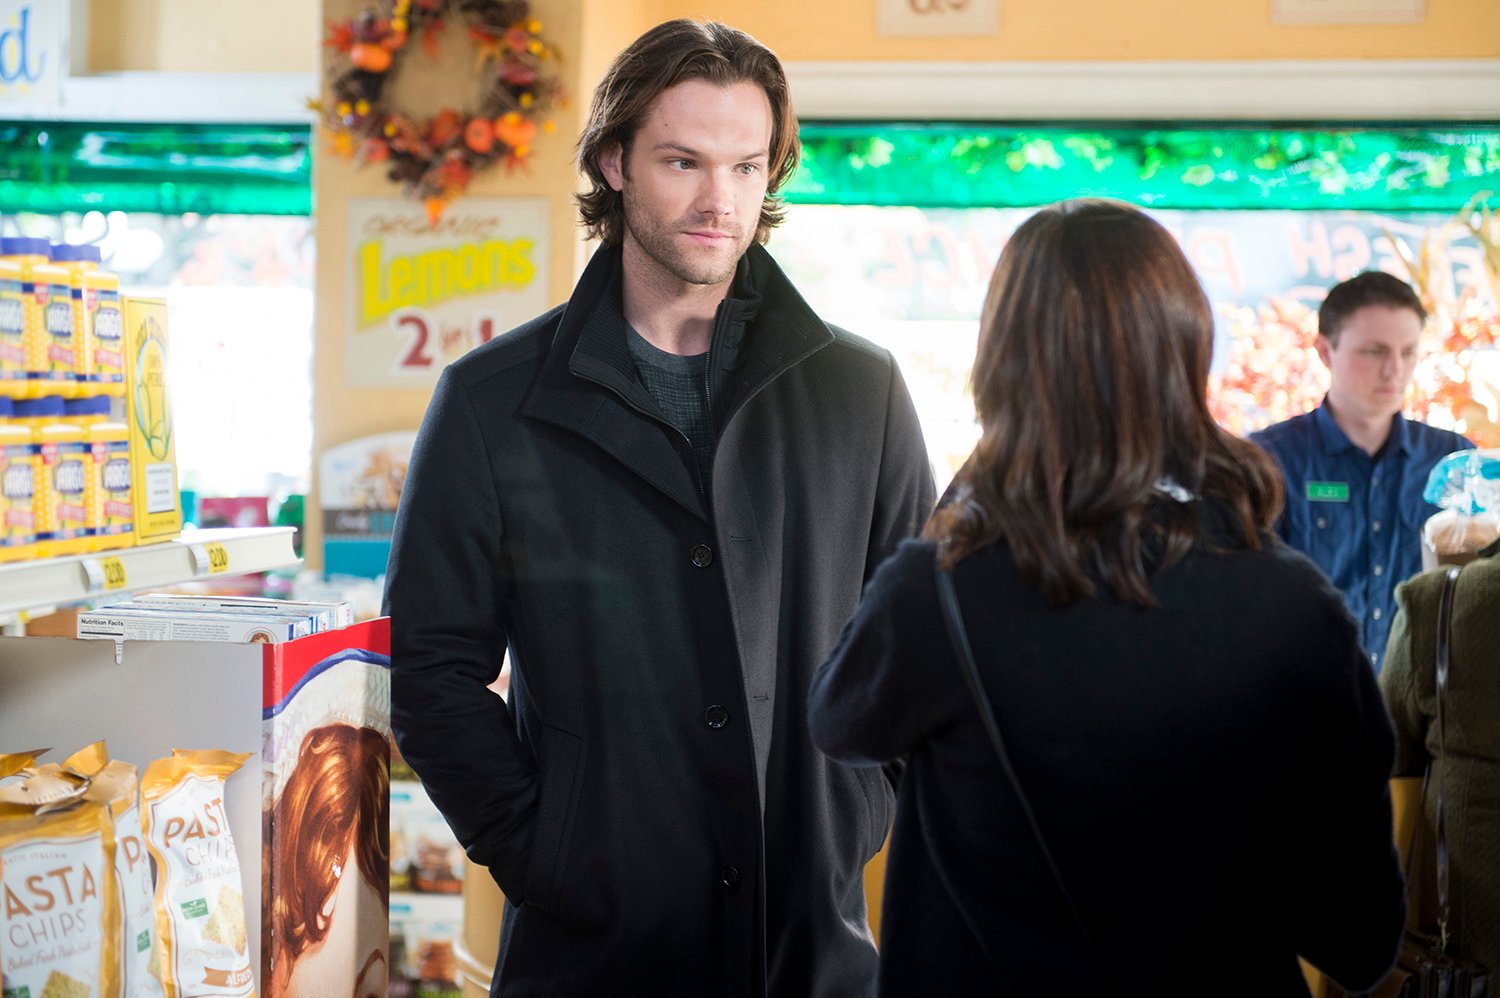 Jared Padalecki as Dean Forrester and Alexis Bledel as Rory Gilmore in Gilmore Girls: A Year in the Life